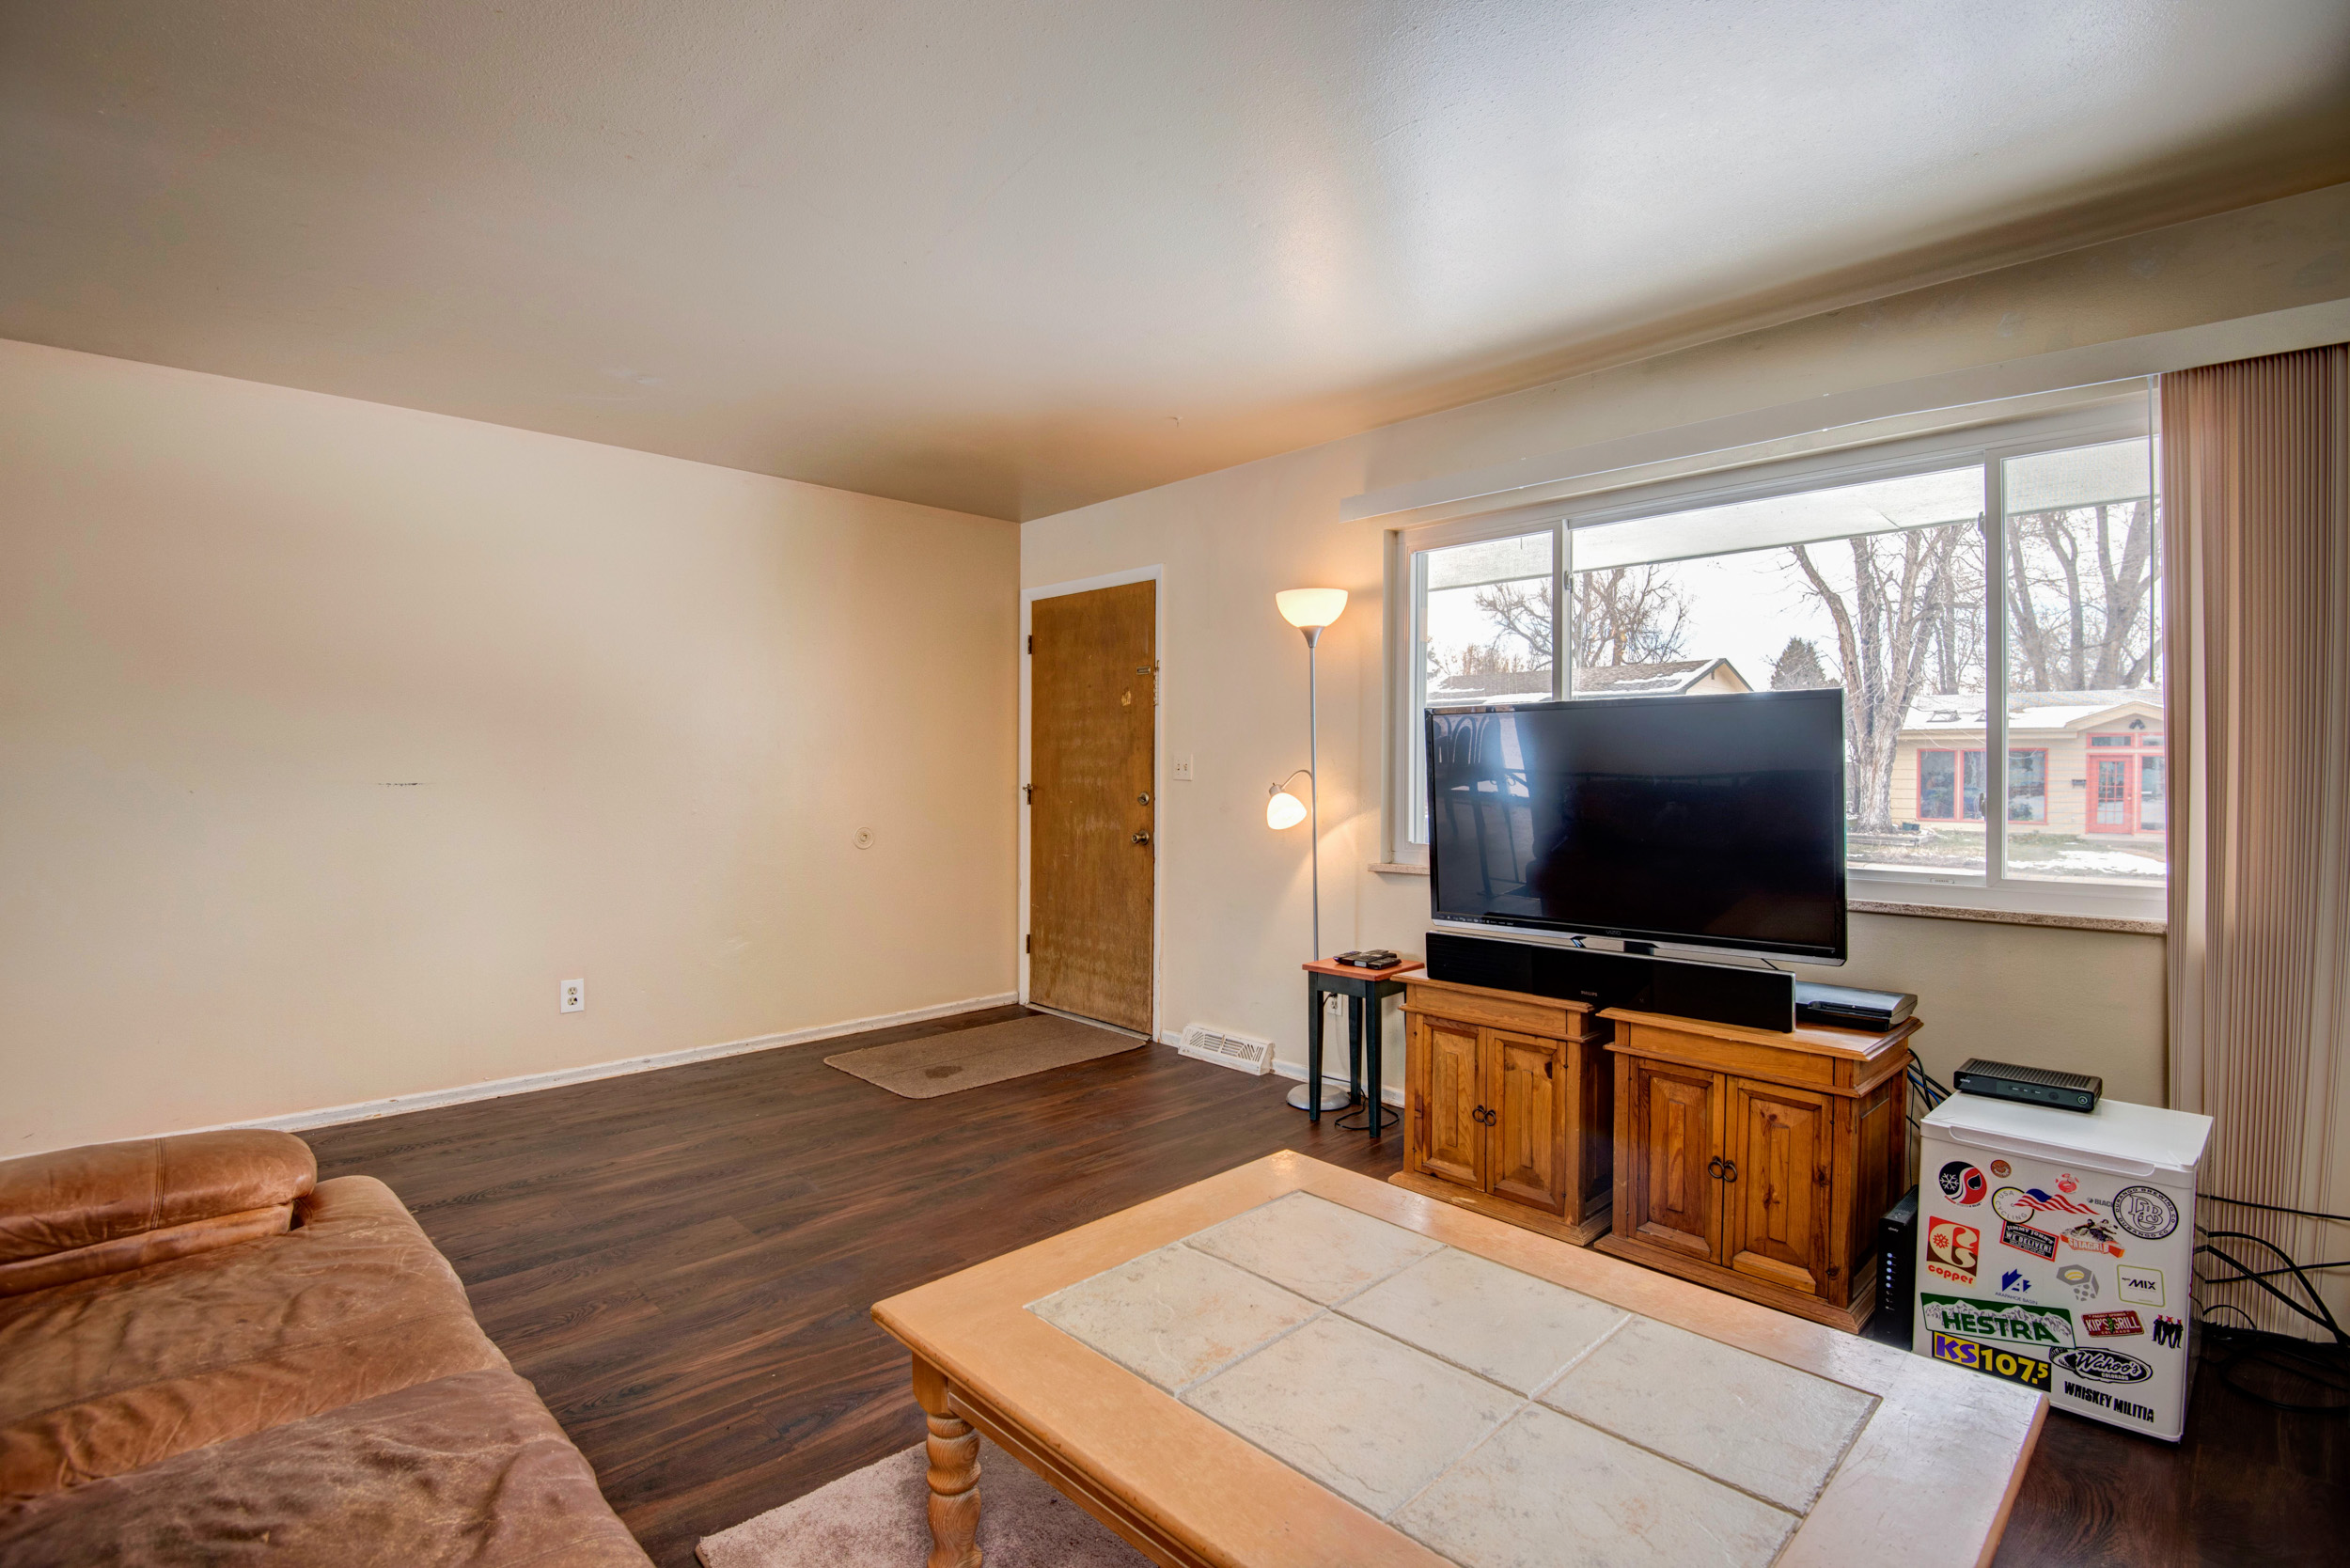 West Fort Collins Home For Sale - SOLD! - Fort Collins Real Estate by ...